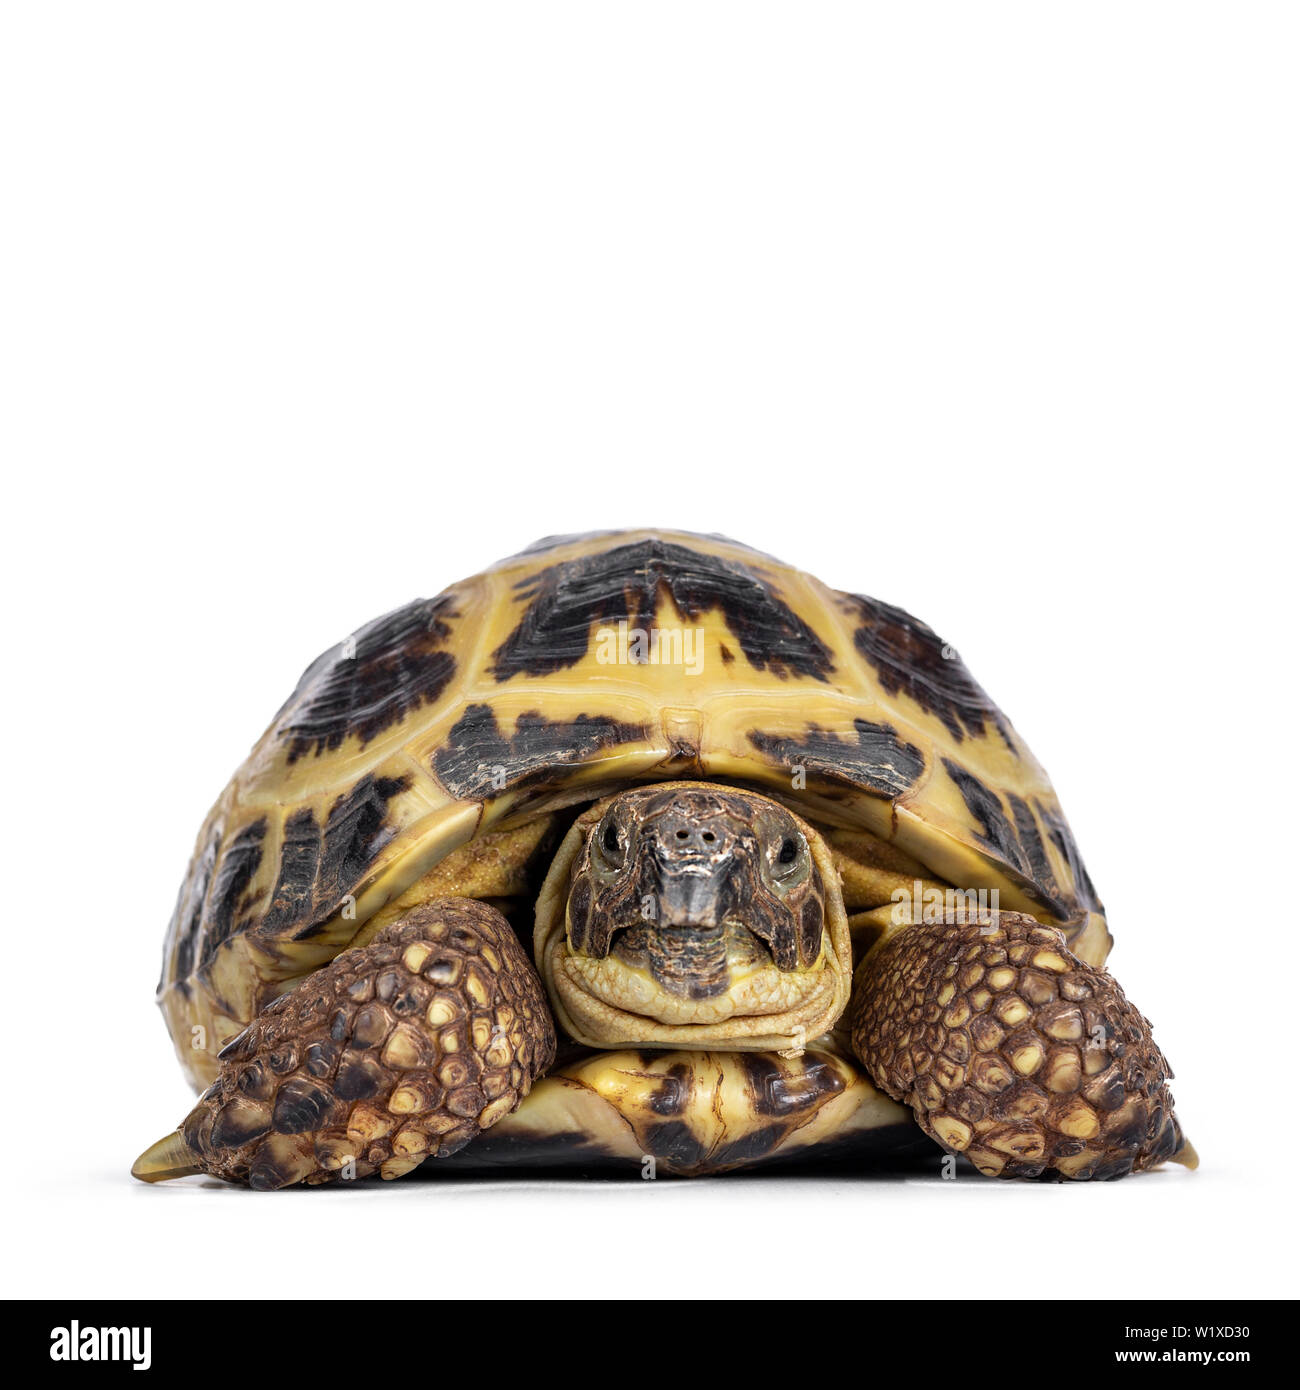 Detailed shot of a Russian Tortoise / turtle, laying, moving facing front toward camera. Looking at lens. Isolated on a white background. Stock Photo